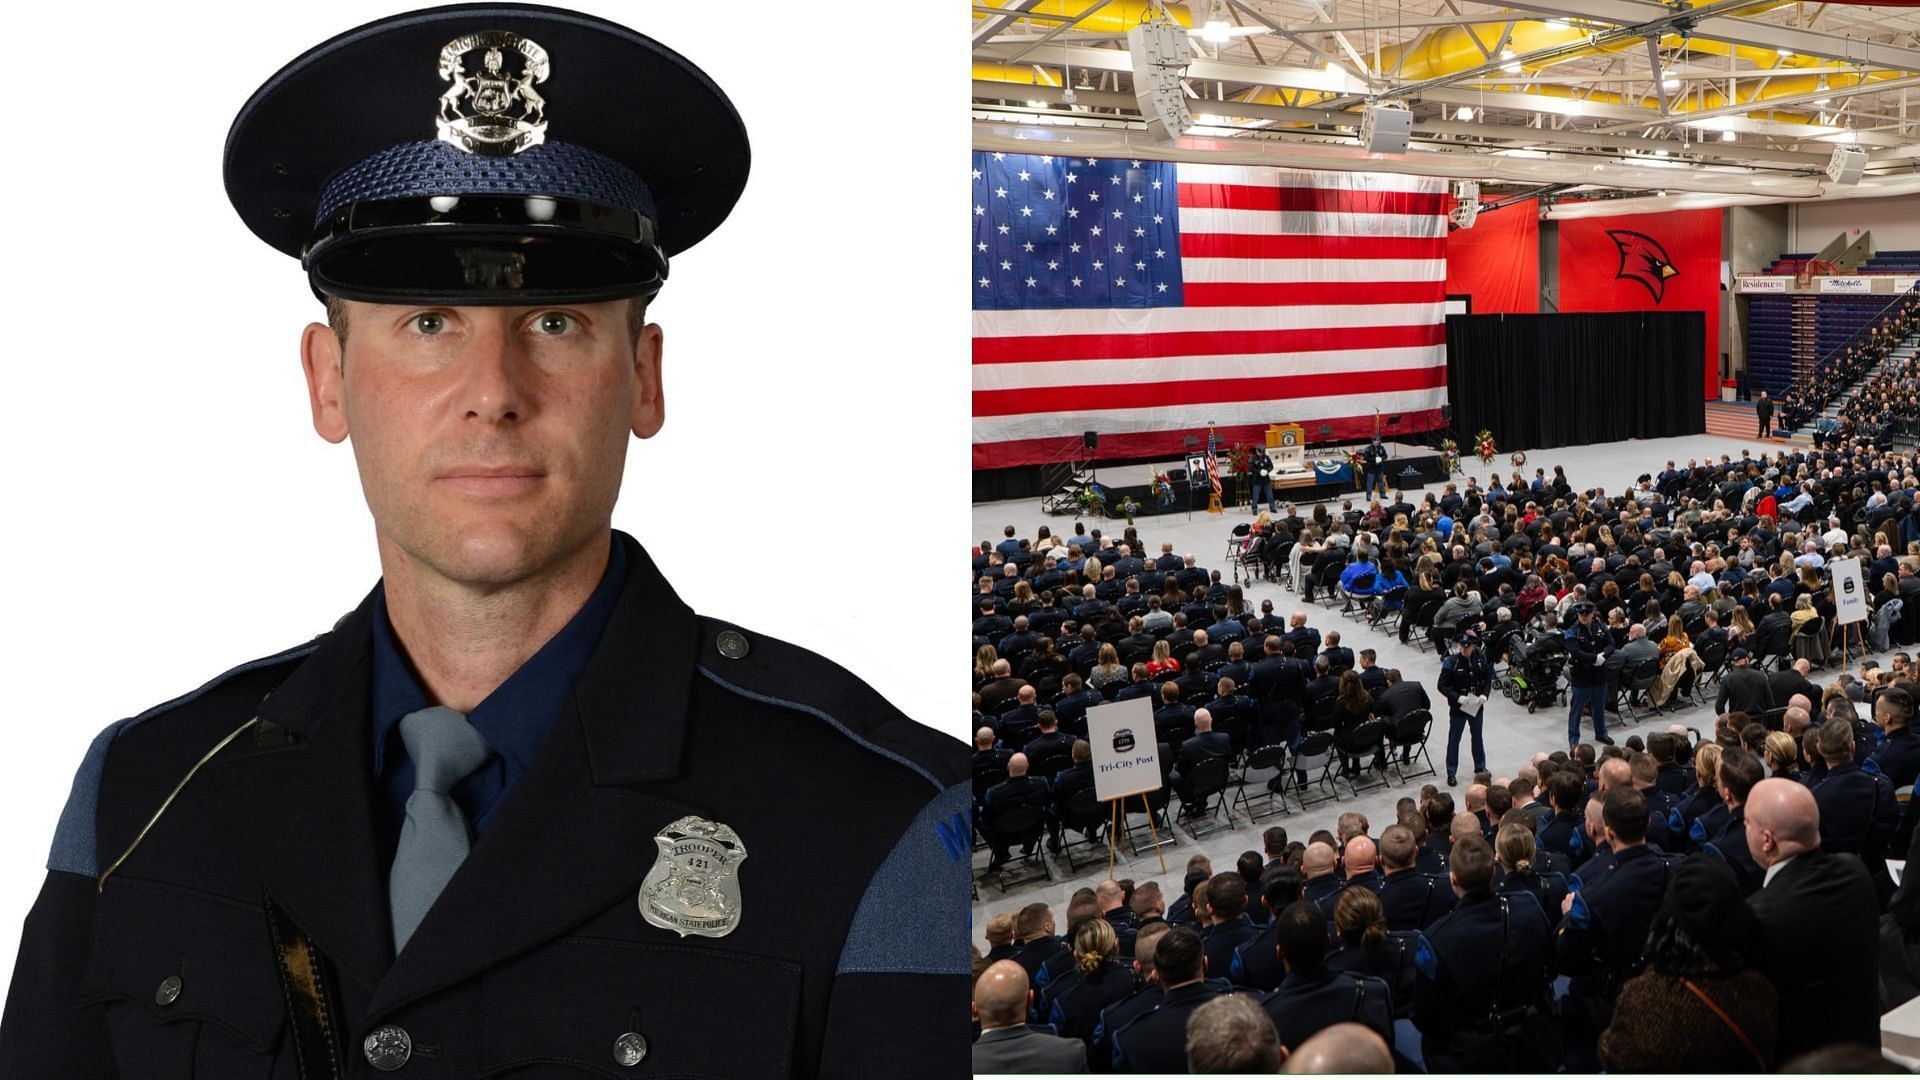 Thousands of people gather to pay tribute to late Michigan State Police Trooper Joel Popp. (Image via Facebook/Larri Bird, Michigan State Police)